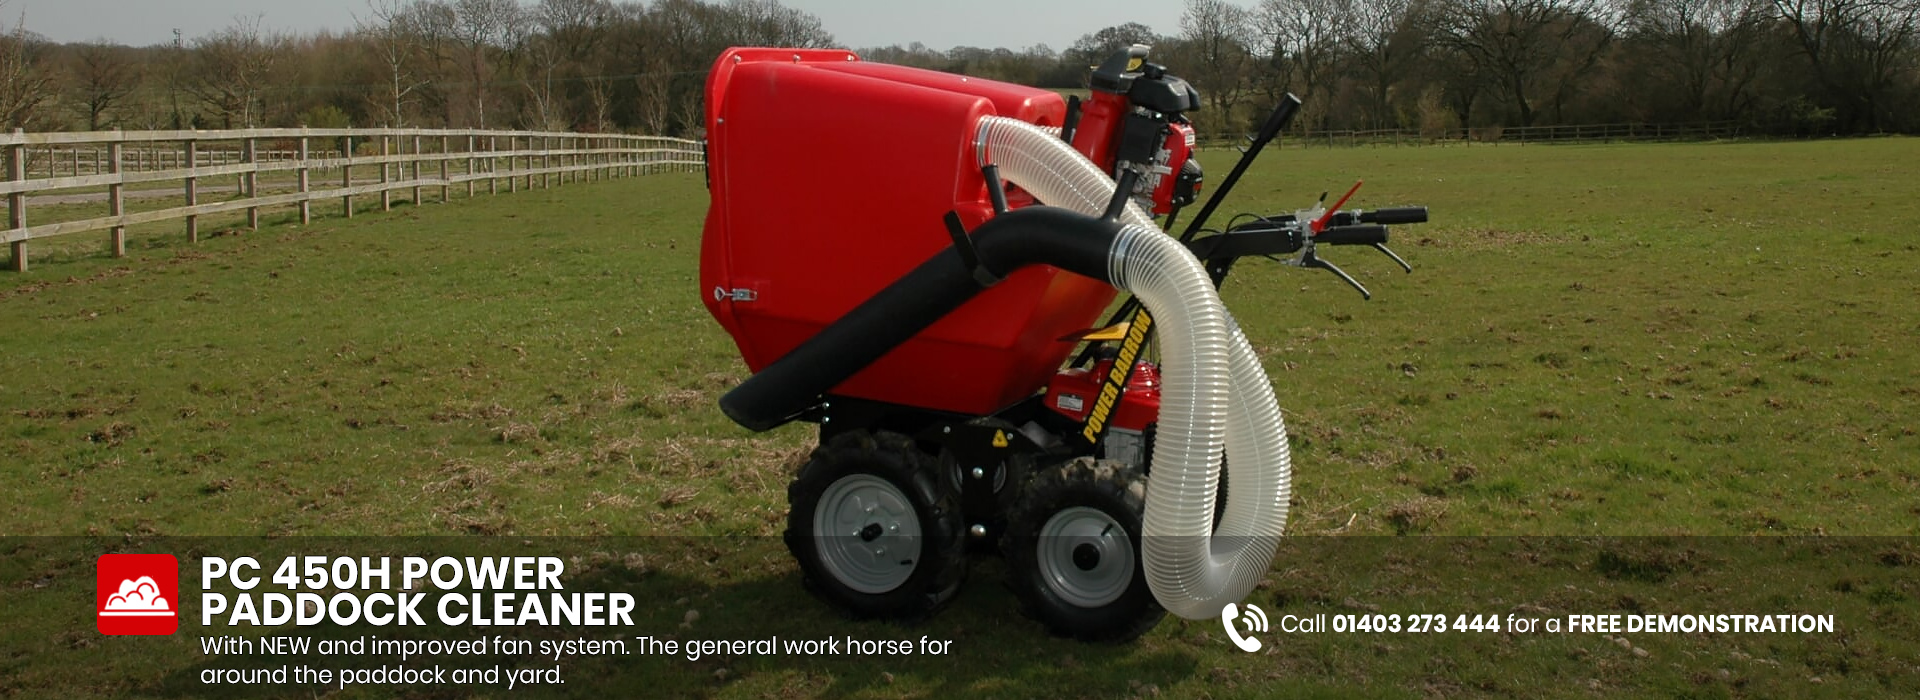 PC450H Paddock Cleaner